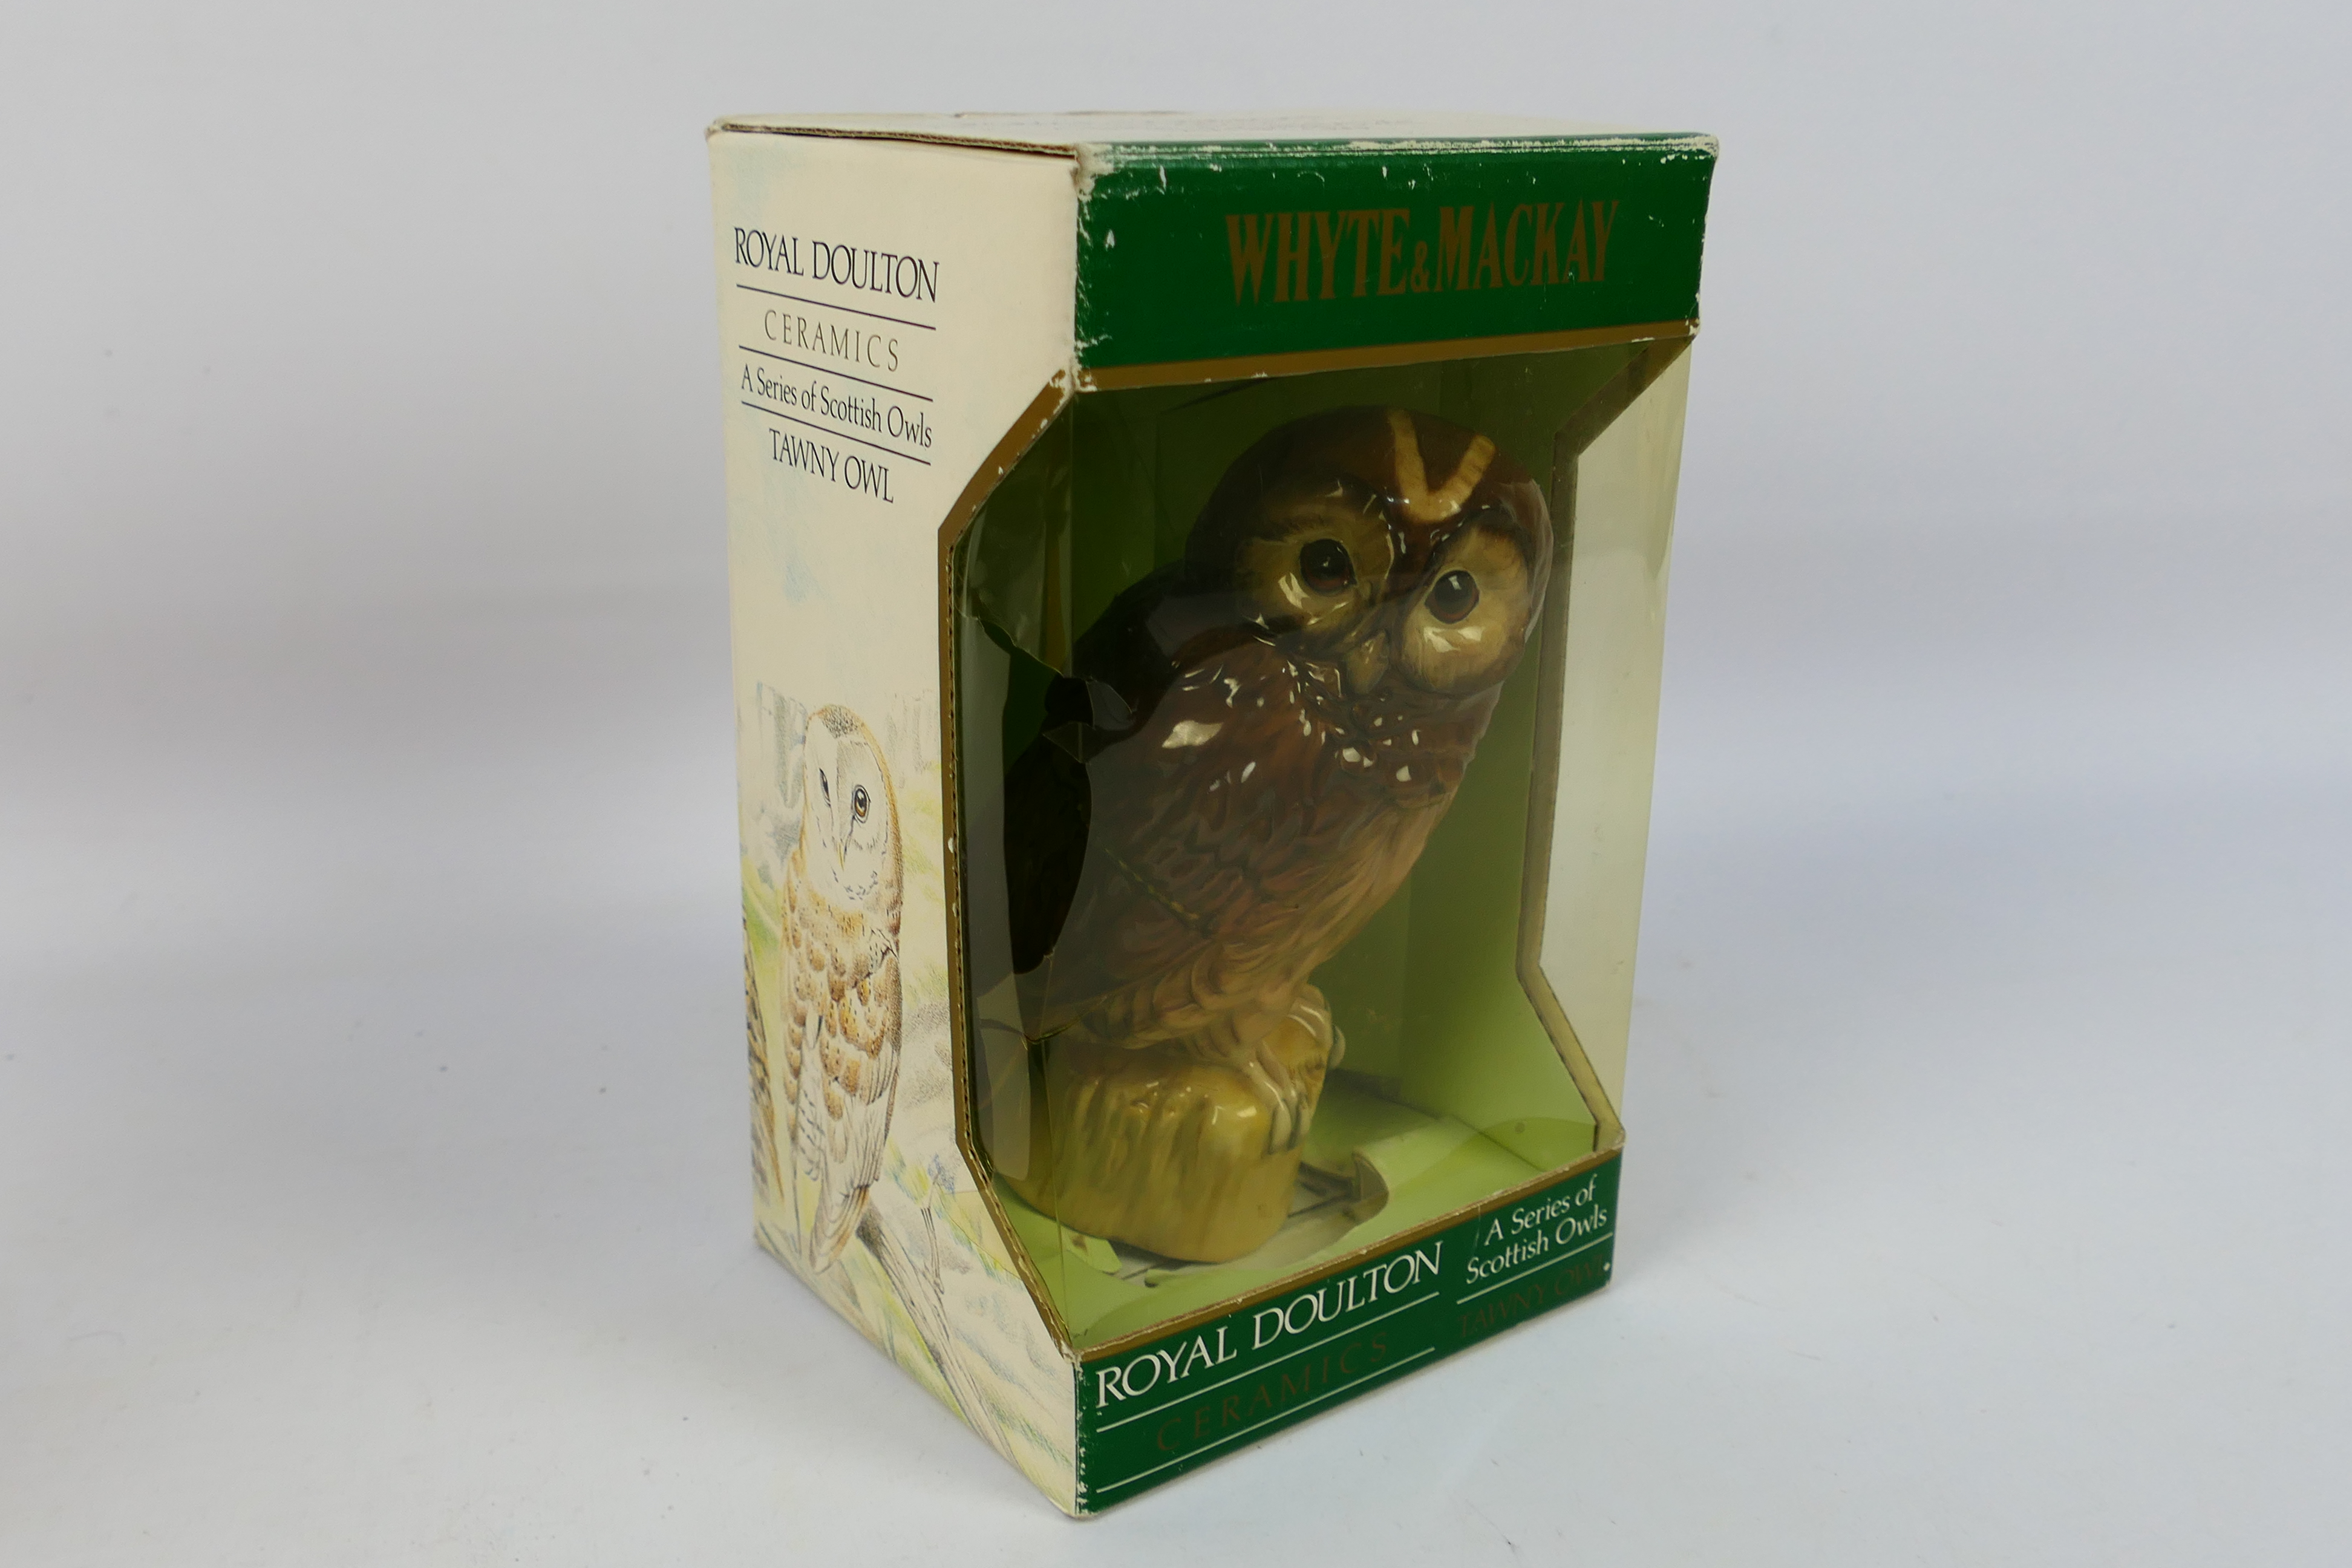 A Royal Doulton Whyte & Mackay Tawny Owl decanter from the Scottish Owls Series, 20cl and 40% abv, - Image 10 of 13